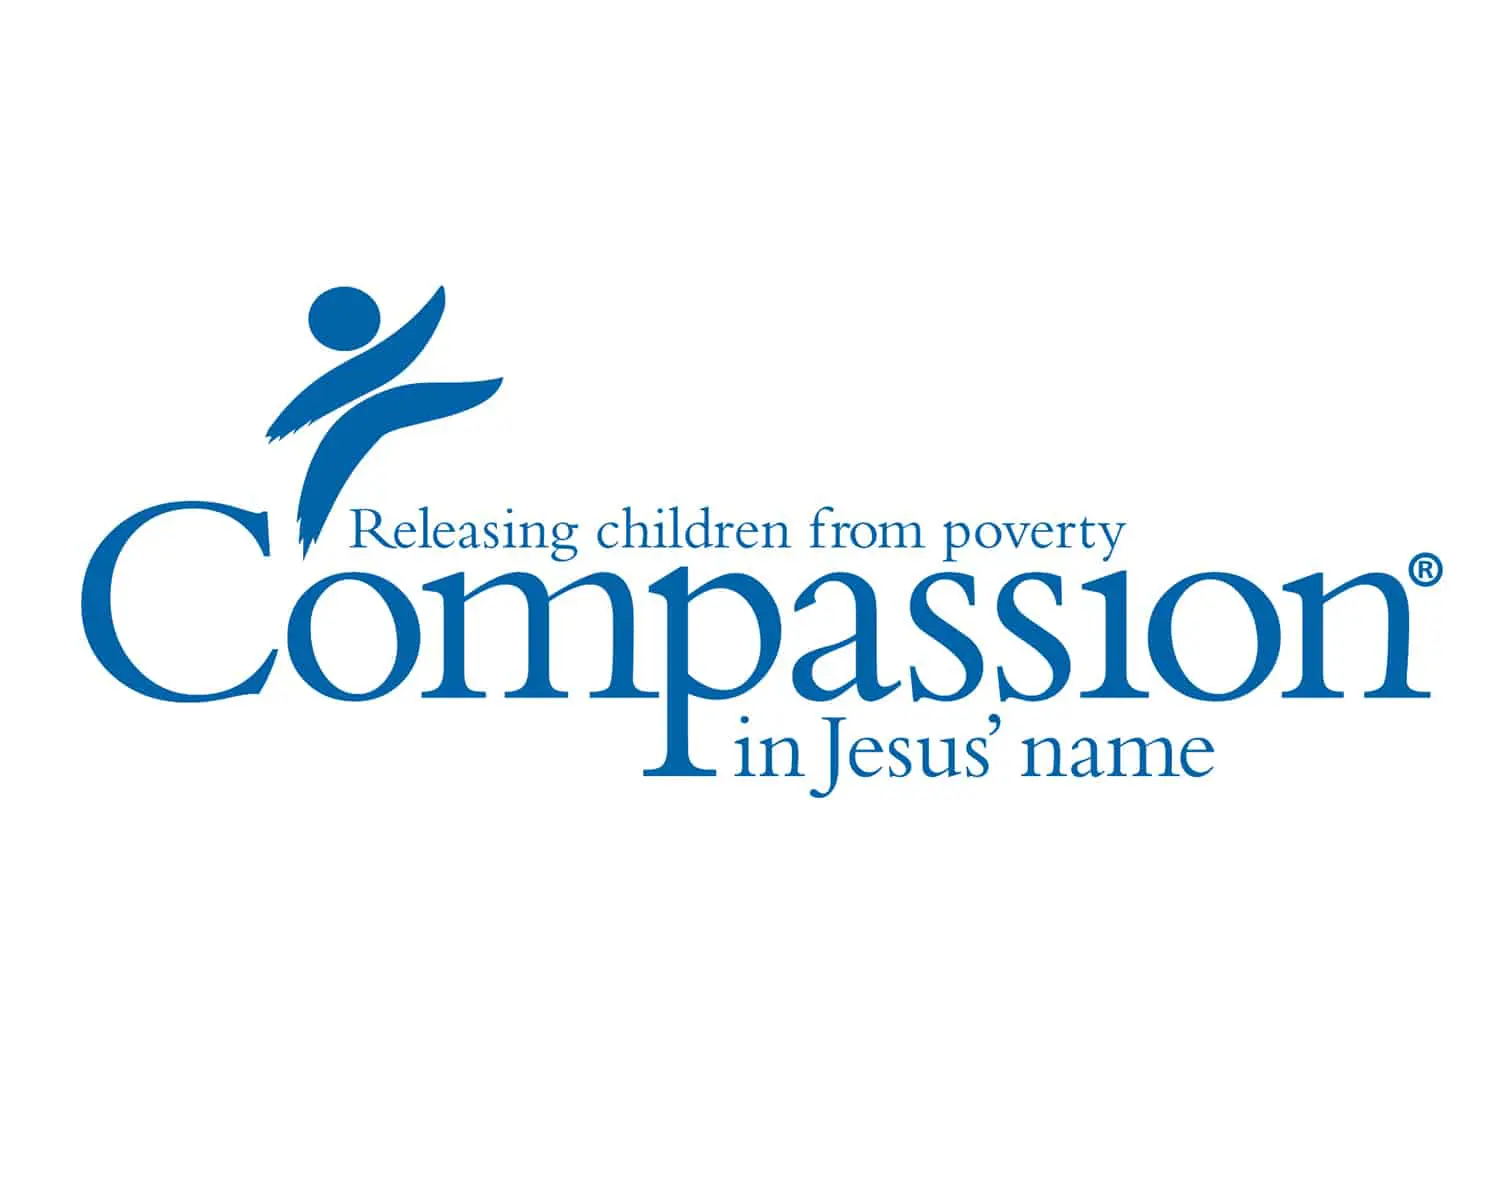 A blue and white logo for compassion in jesus name.